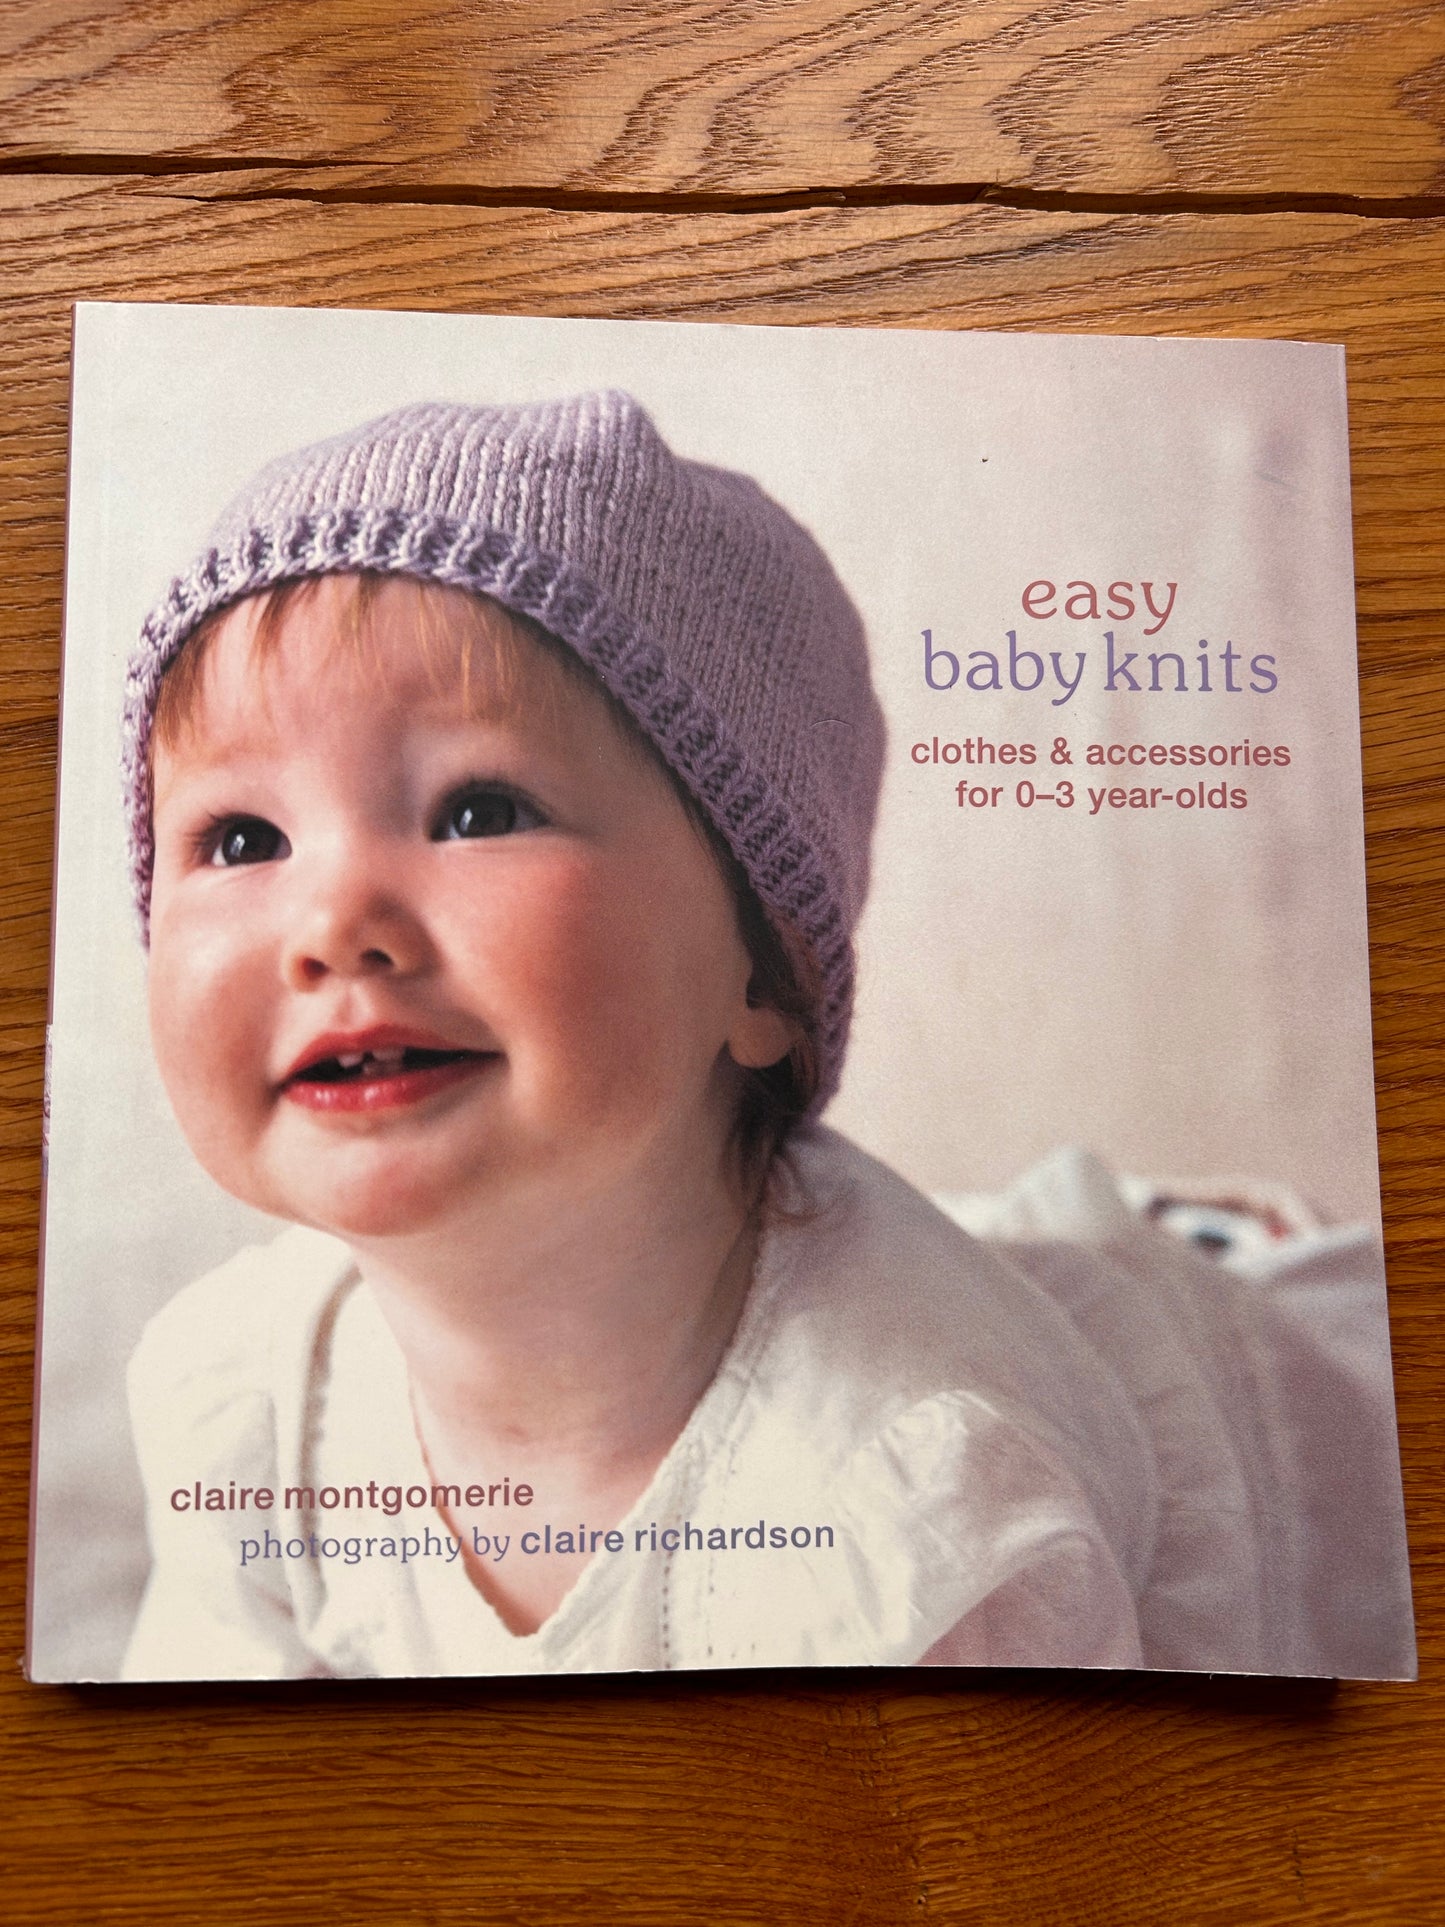 Easy Baby Knits: Clothes & Accessories for 0-3 year-olds